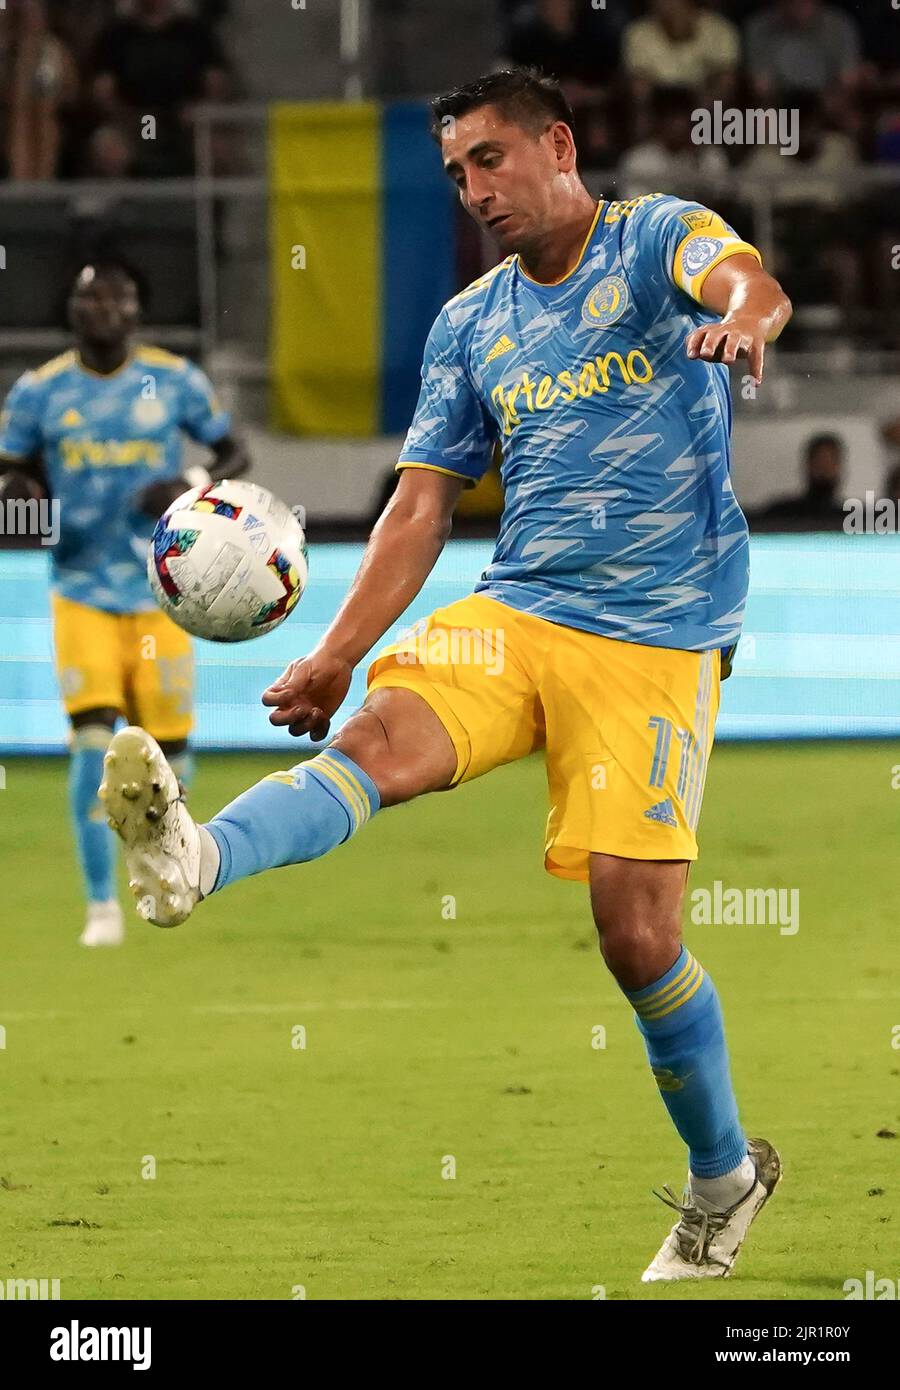 WASHINGTON, DC, USA - 20 AUGUST 2022: Philadelphia Union midfielder Alejandro Bedoya (11) controls the ball during a MLS match between D.C United and the Philadelphia Union on August 20, 2022, at Audi Field, in Washington, DC. (Photo by Tony Quinn-Alamy Live News) Stock Photo